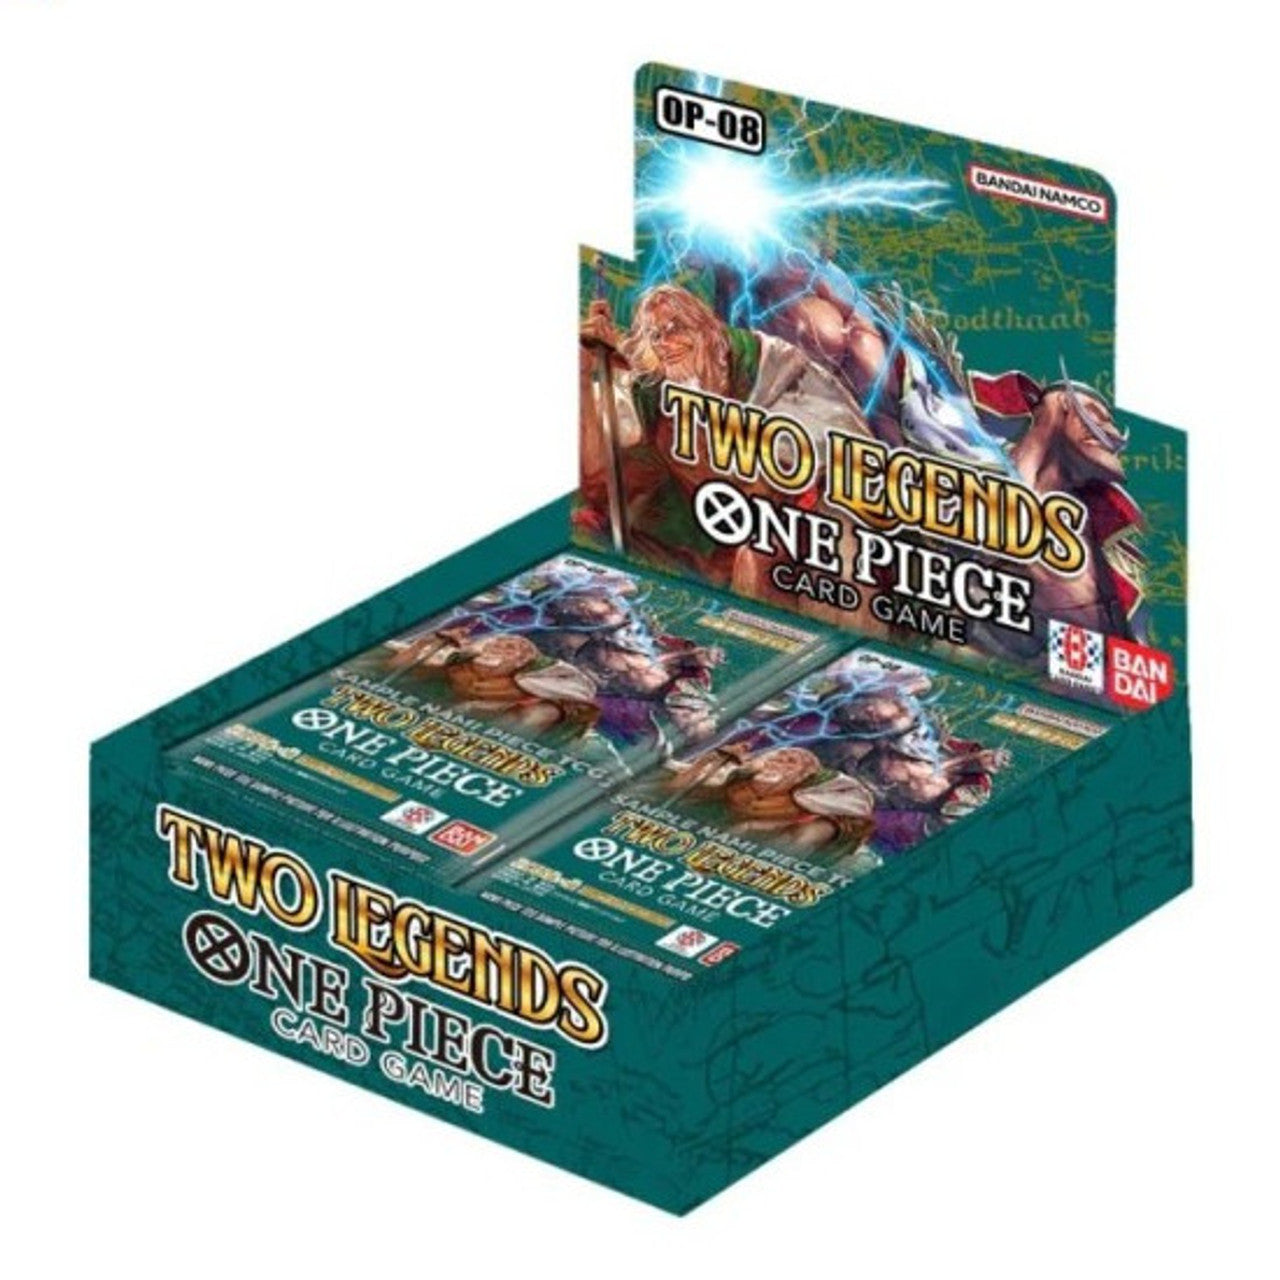 One Piece OP-08: Two Legends Booster Box (ENGLISH - PREORDER)